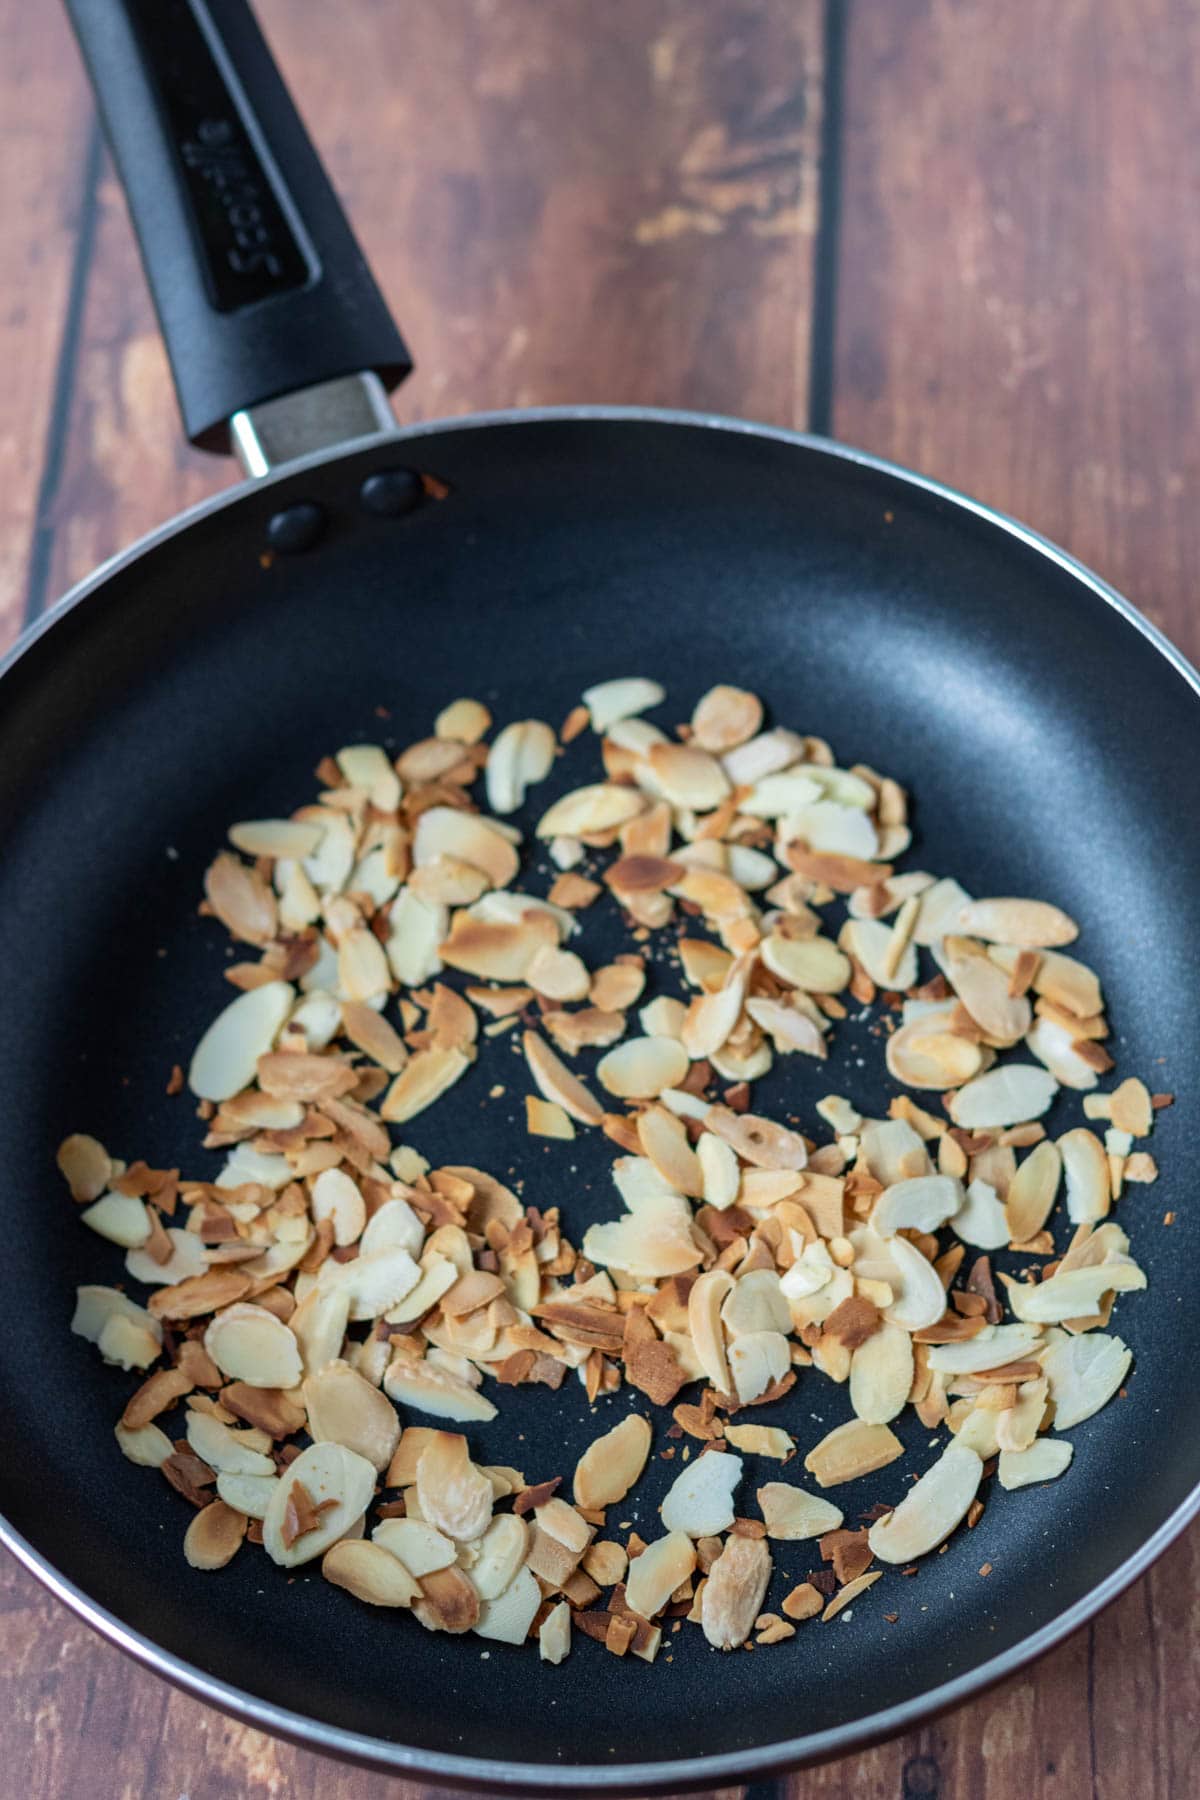 Flaked almonds toasted in a non-stick frying pan.